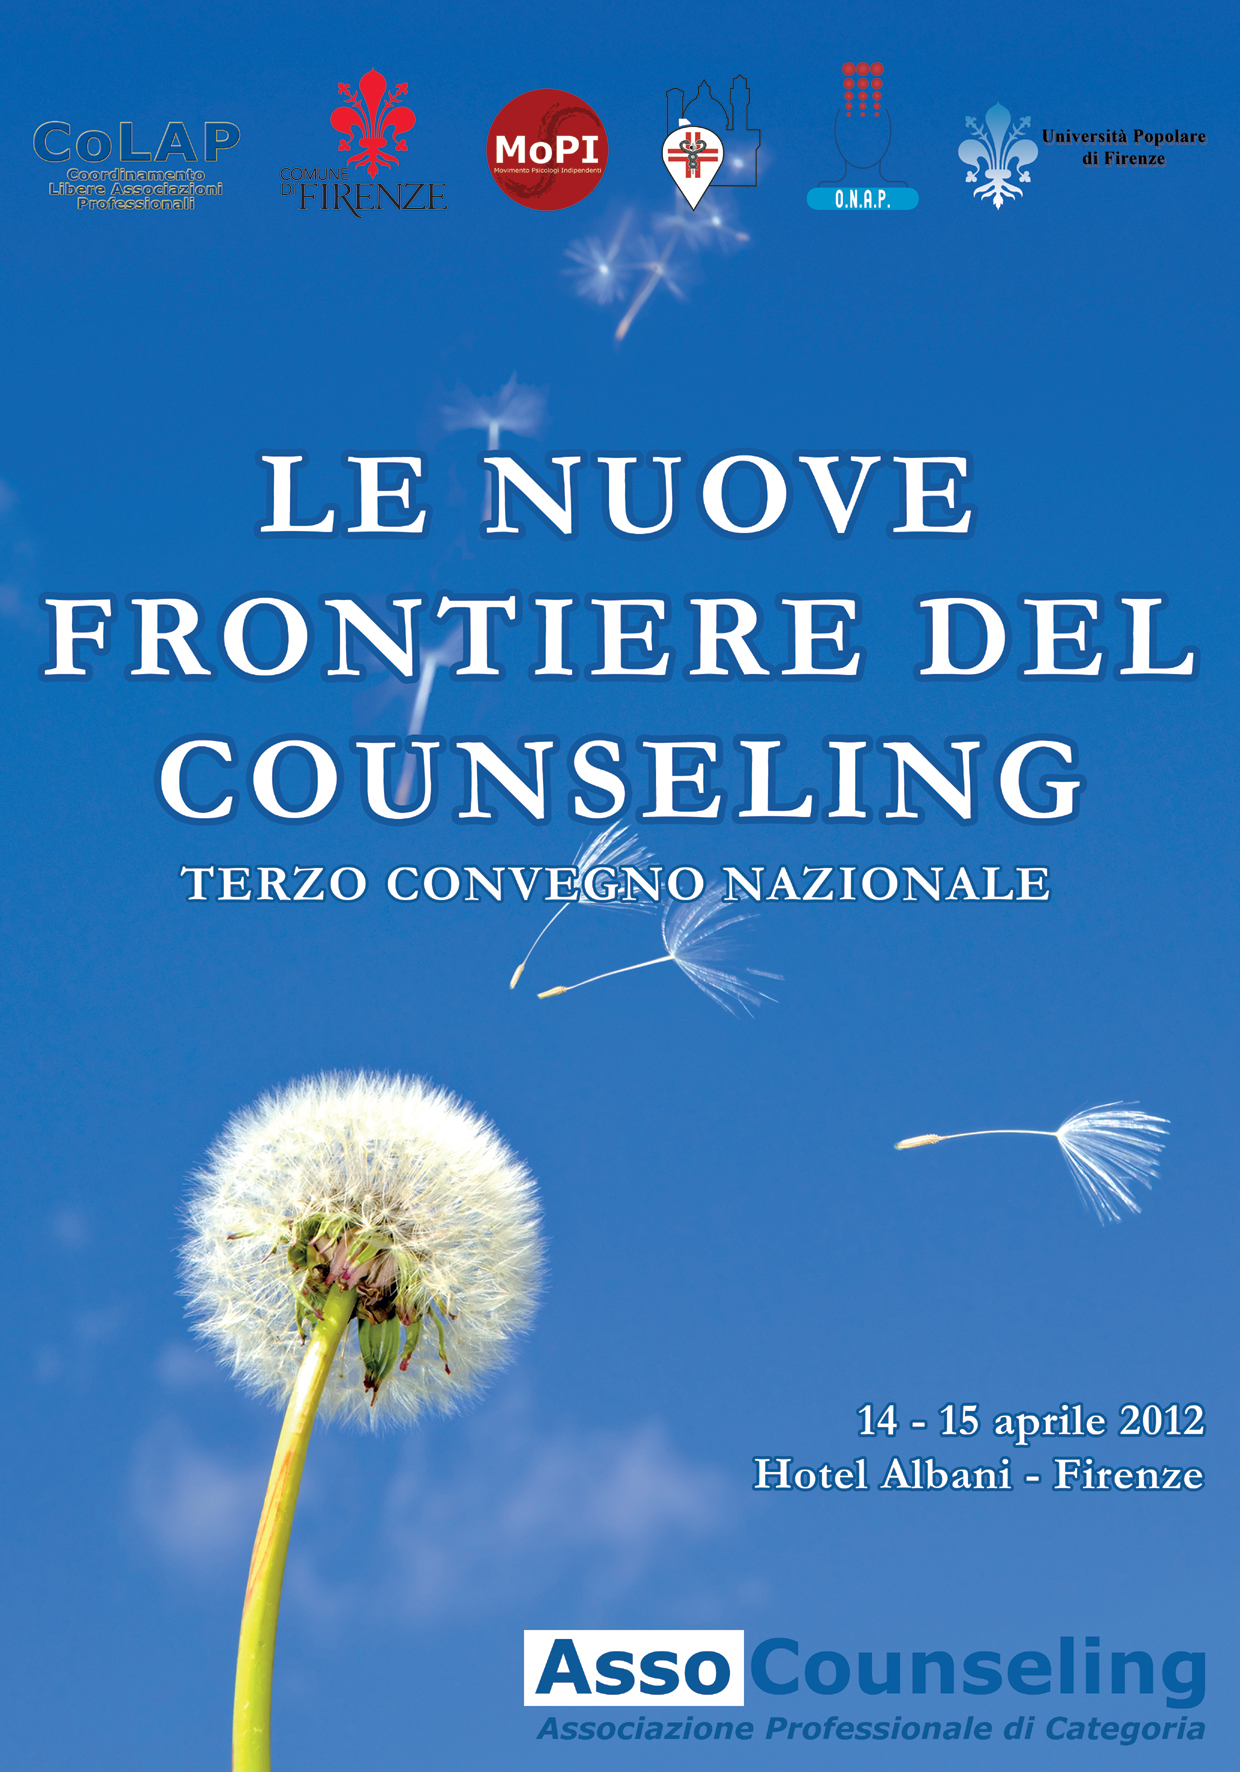 Le nuove frontiere del counseling